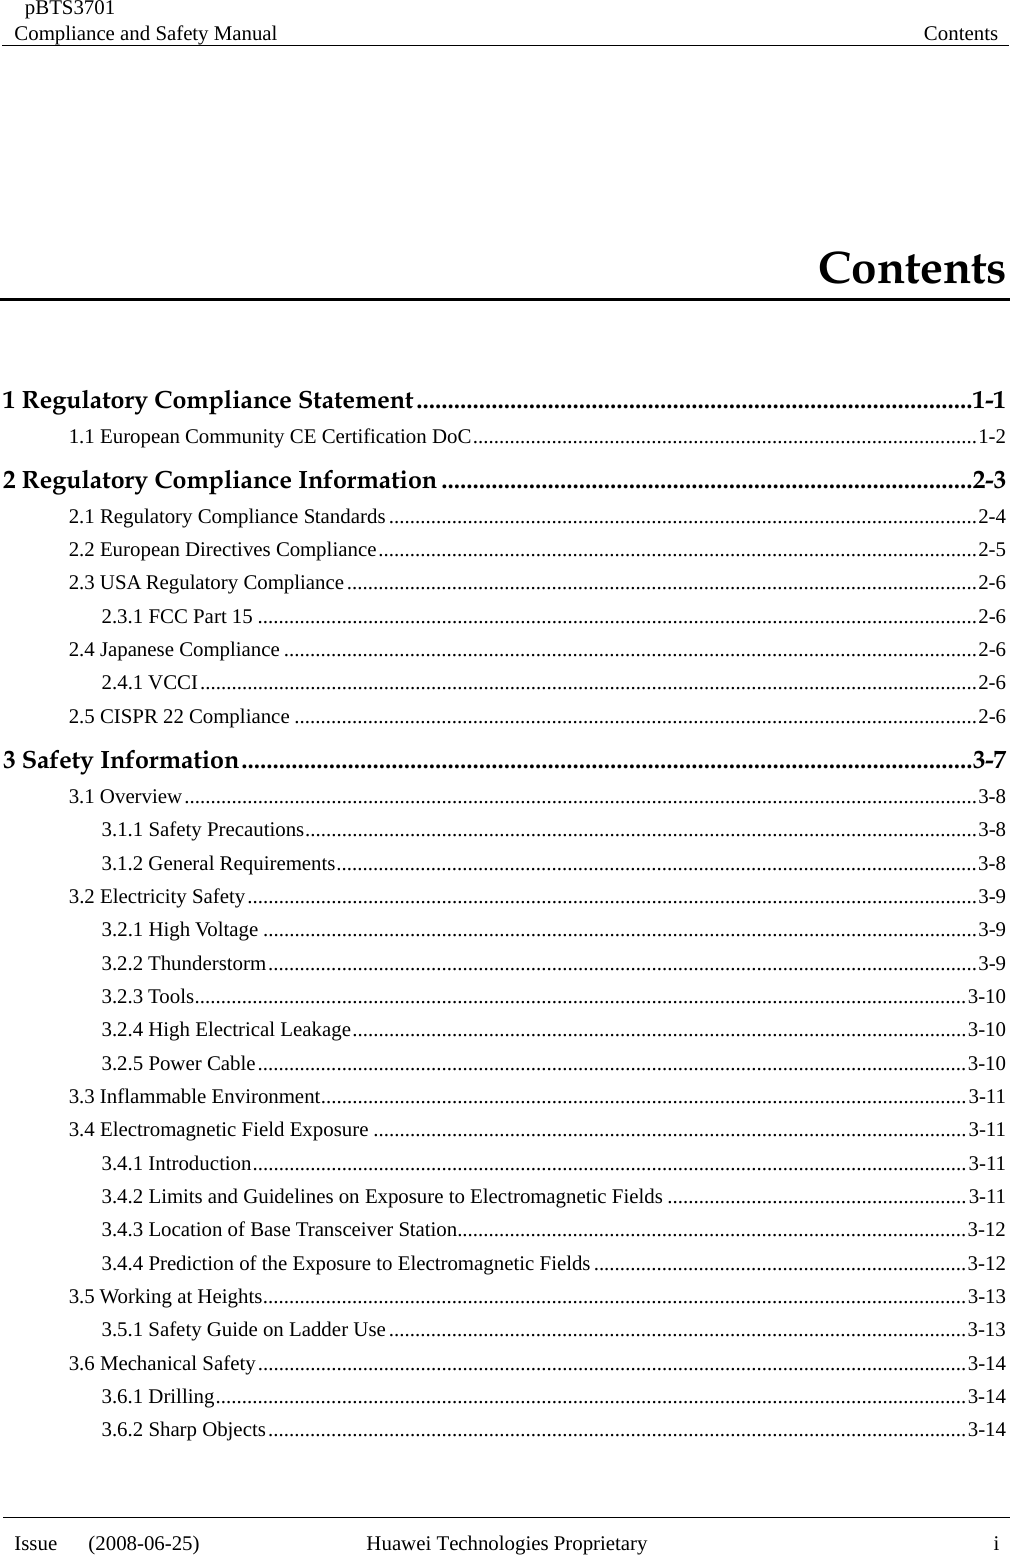  pBTS3701 Compliance and Safety Manual  Contents Issue   (2008-06-25)  Huawei Technologies Proprietary  iContents 1 Regulatory Compliance Statement.........................................................................................1-1 1.1 European Community CE Certification DoC................................................................................................1-2 2 Regulatory Compliance Information .....................................................................................2-3 2.1 Regulatory Compliance Standards................................................................................................................2-4 2.2 European Directives Compliance..................................................................................................................2-5 2.3 USA Regulatory Compliance........................................................................................................................2-6 2.3.1 FCC Part 15 .........................................................................................................................................2-6 2.4 Japanese Compliance ....................................................................................................................................2-6 2.4.1 VCCI....................................................................................................................................................2-6 2.5 CISPR 22 Compliance ..................................................................................................................................2-6 3 Safety Information.....................................................................................................................3-7 3.1 Overview.......................................................................................................................................................3-8 3.1.1 Safety Precautions................................................................................................................................3-8 3.1.2 General Requirements..........................................................................................................................3-8 3.2 Electricity Safety...........................................................................................................................................3-9 3.2.1 High Voltage ........................................................................................................................................3-9 3.2.2 Thunderstorm.......................................................................................................................................3-9 3.2.3 Tools...................................................................................................................................................3-10 3.2.4 High Electrical Leakage.....................................................................................................................3-10 3.2.5 Power Cable.......................................................................................................................................3-10 3.3 Inflammable Environment...........................................................................................................................3-11 3.4 Electromagnetic Field Exposure .................................................................................................................3-11 3.4.1 Introduction........................................................................................................................................3-11 3.4.2 Limits and Guidelines on Exposure to Electromagnetic Fields .........................................................3-11 3.4.3 Location of Base Transceiver Station.................................................................................................3-12 3.4.4 Prediction of the Exposure to Electromagnetic Fields.......................................................................3-12 3.5 Working at Heights......................................................................................................................................3-13 3.5.1 Safety Guide on Ladder Use..............................................................................................................3-13 3.6 Mechanical Safety.......................................................................................................................................3-14 3.6.1 Drilling...............................................................................................................................................3-14 3.6.2 Sharp Objects.....................................................................................................................................3-14  